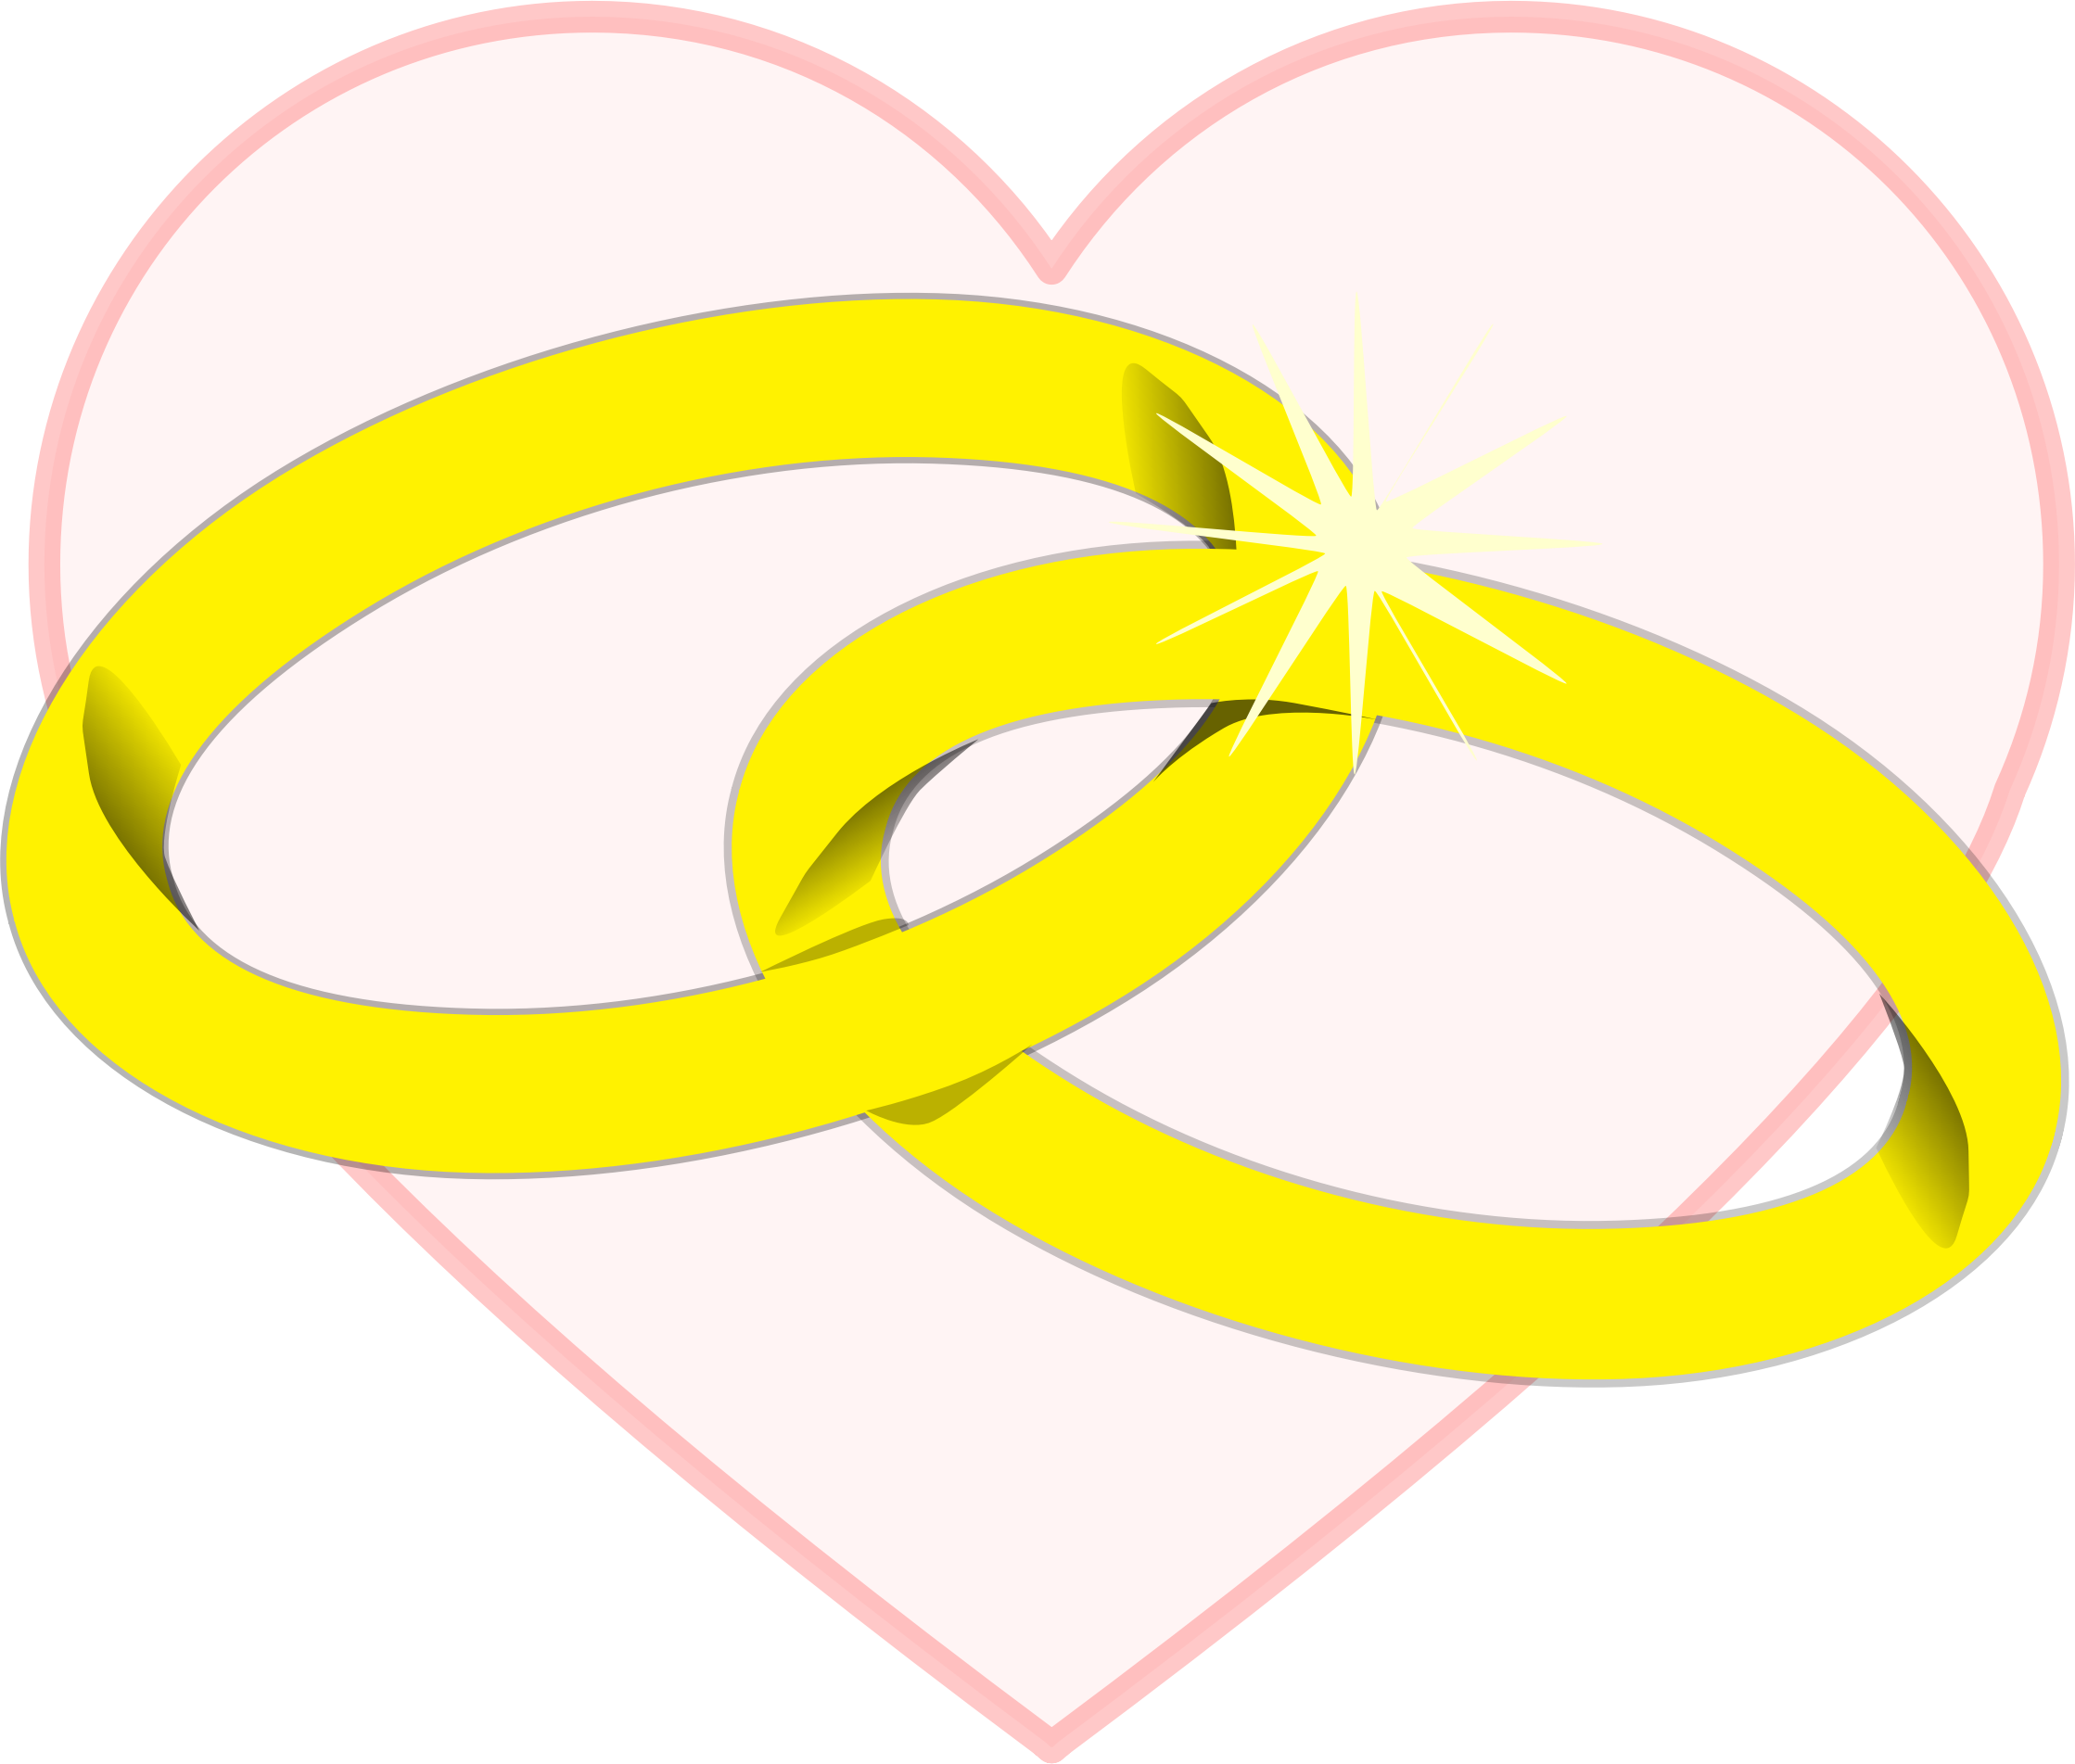 Heart Ring PNG Image